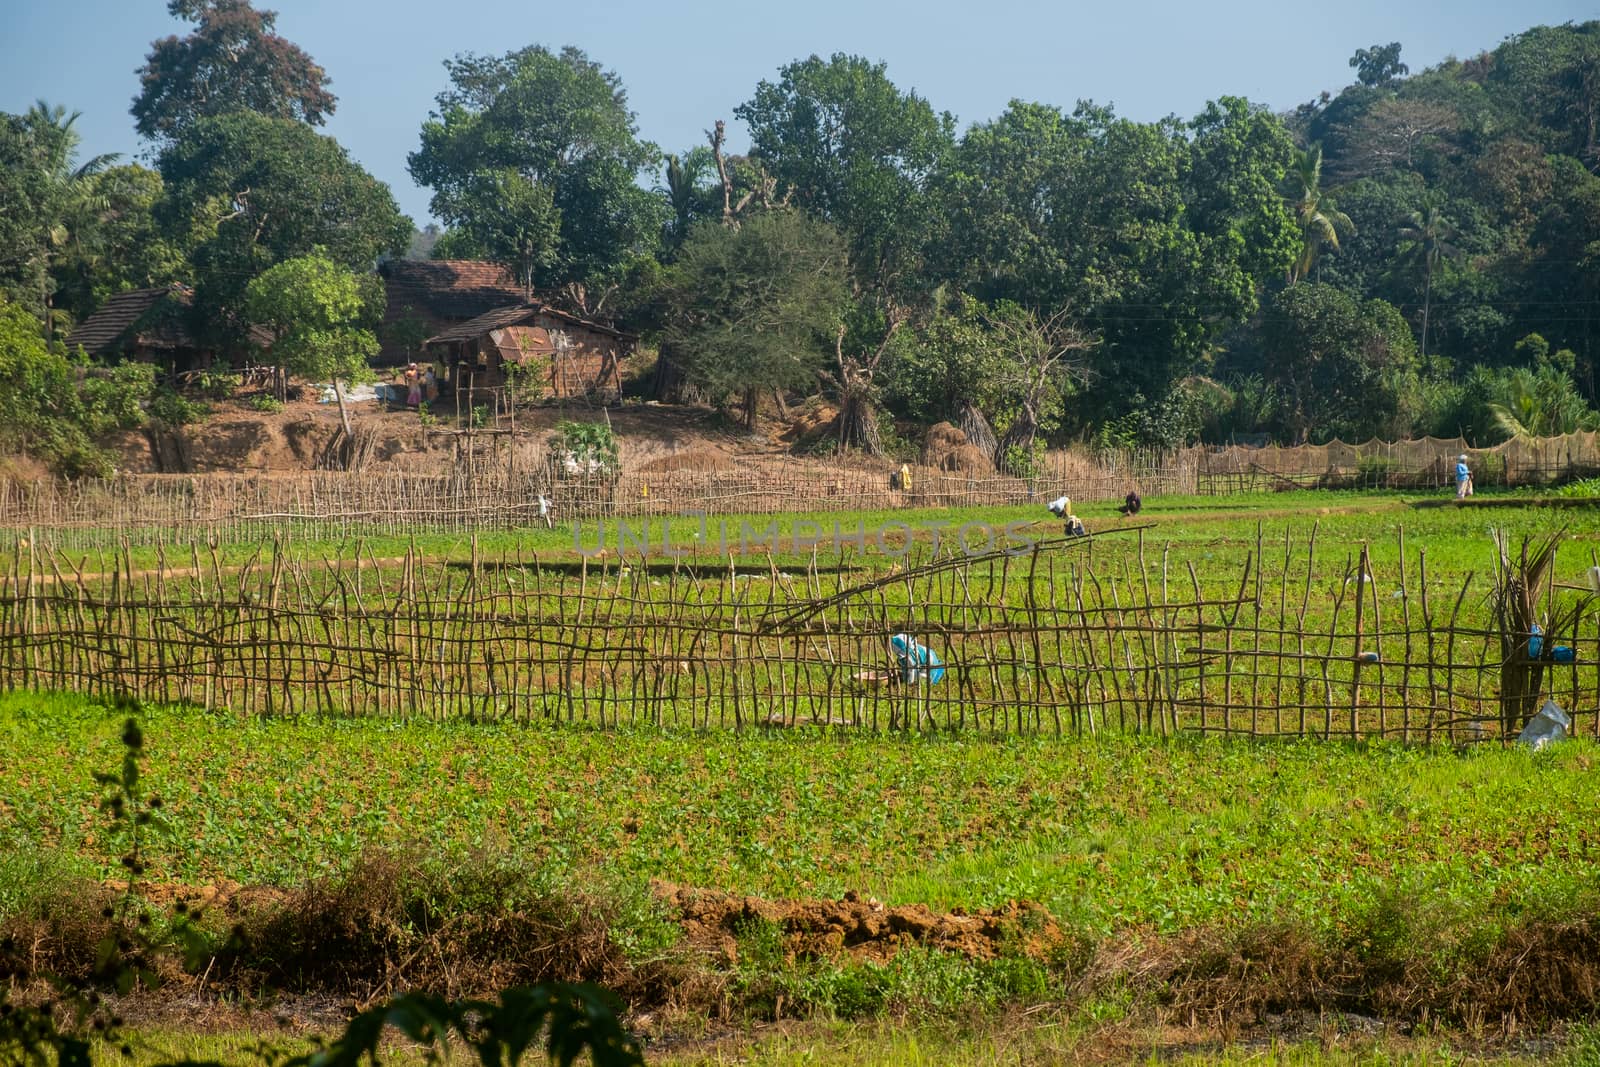 Workers in field, India by snep_photo